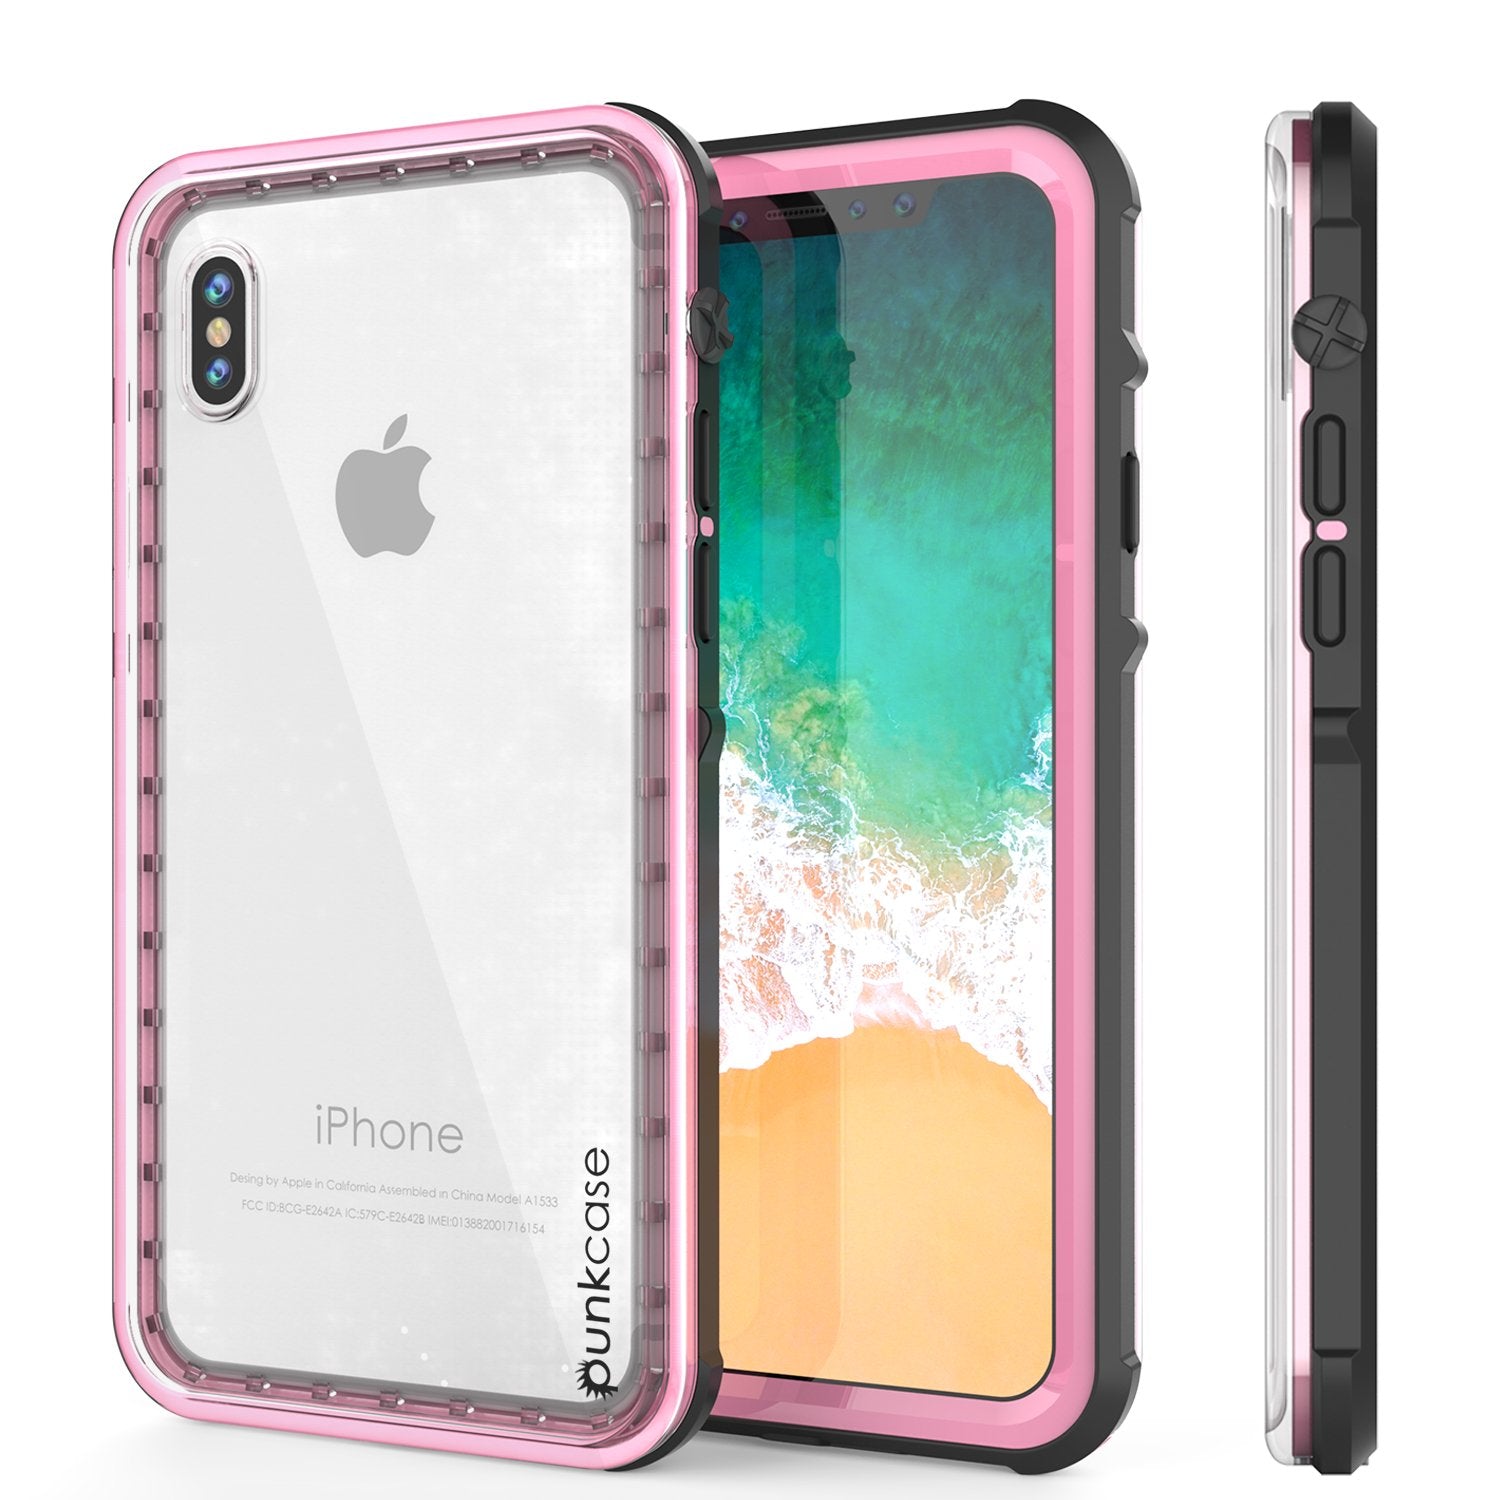 iPhone X Case, PUNKCase [CRYSTAL SERIES] Protective IP68 Certified Cover W/ Attached Screen Protector - DustPROOF, ShockPROOF, SnowPROOF - Ultra Slim Fit for Apple iPhone 10 [PINK]